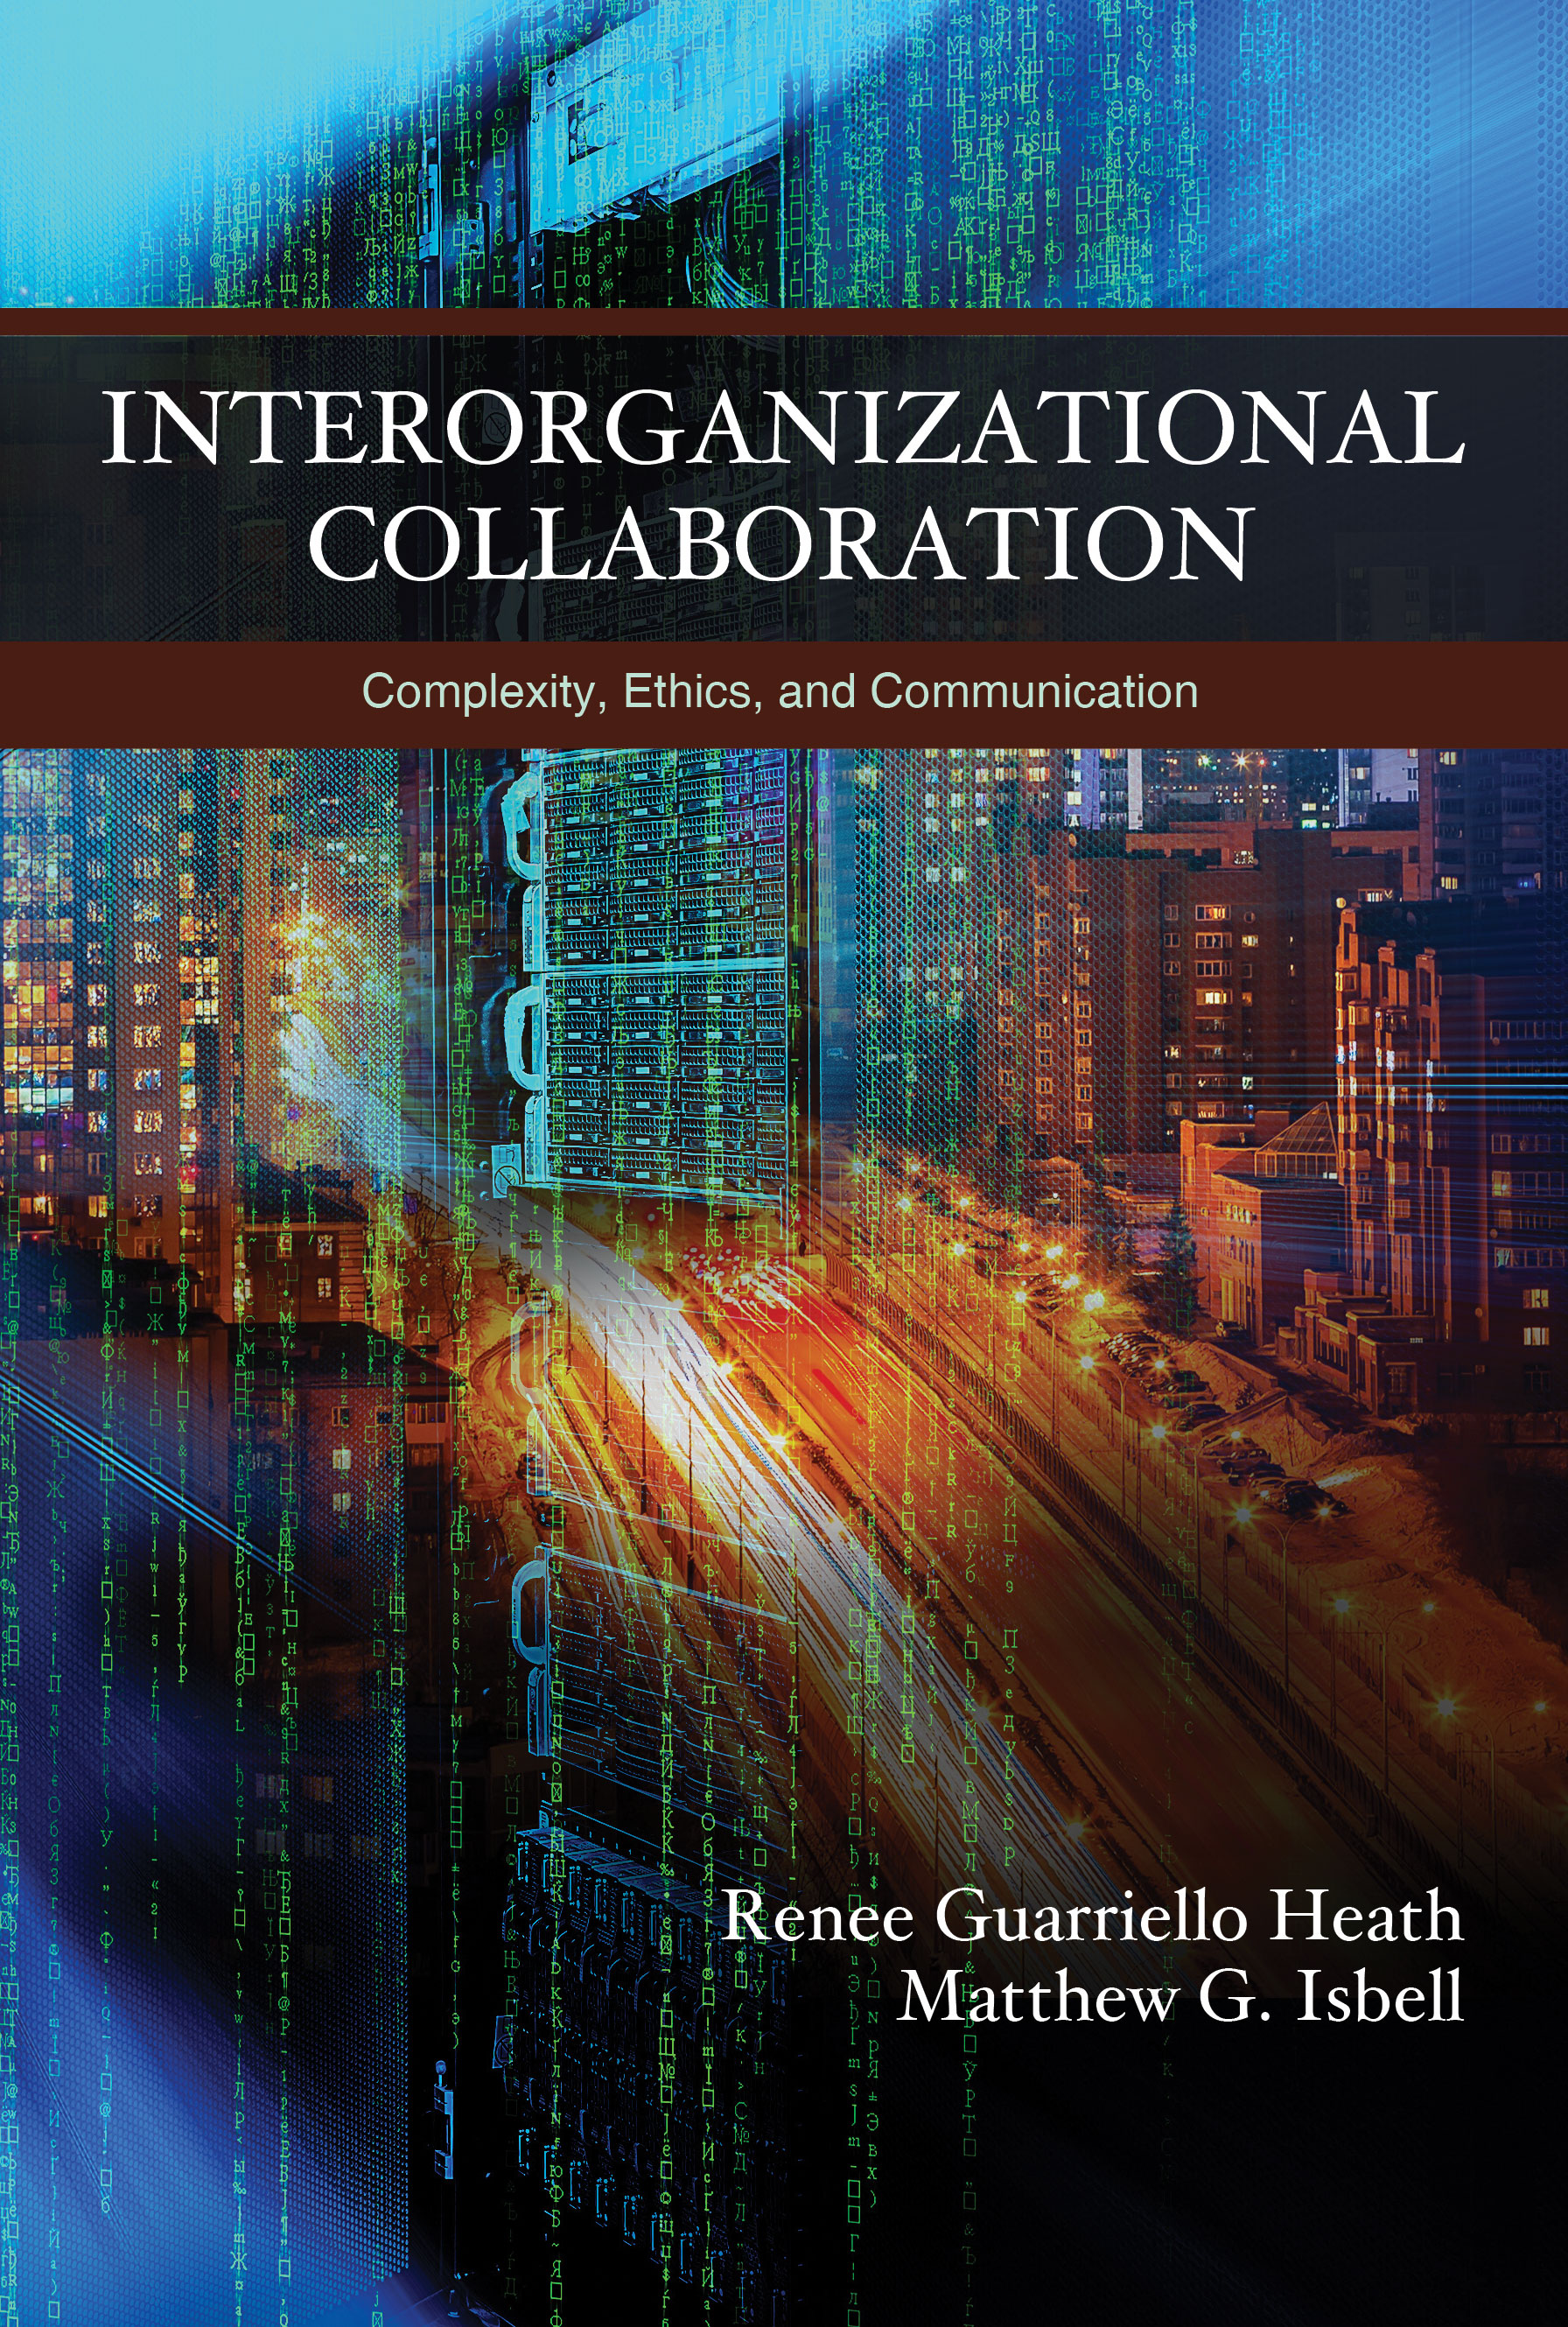 Interorganizational Collaboration: Complexity, Ethics, and Communication by Renee Guarriello Heath, Matthew G. Isbell